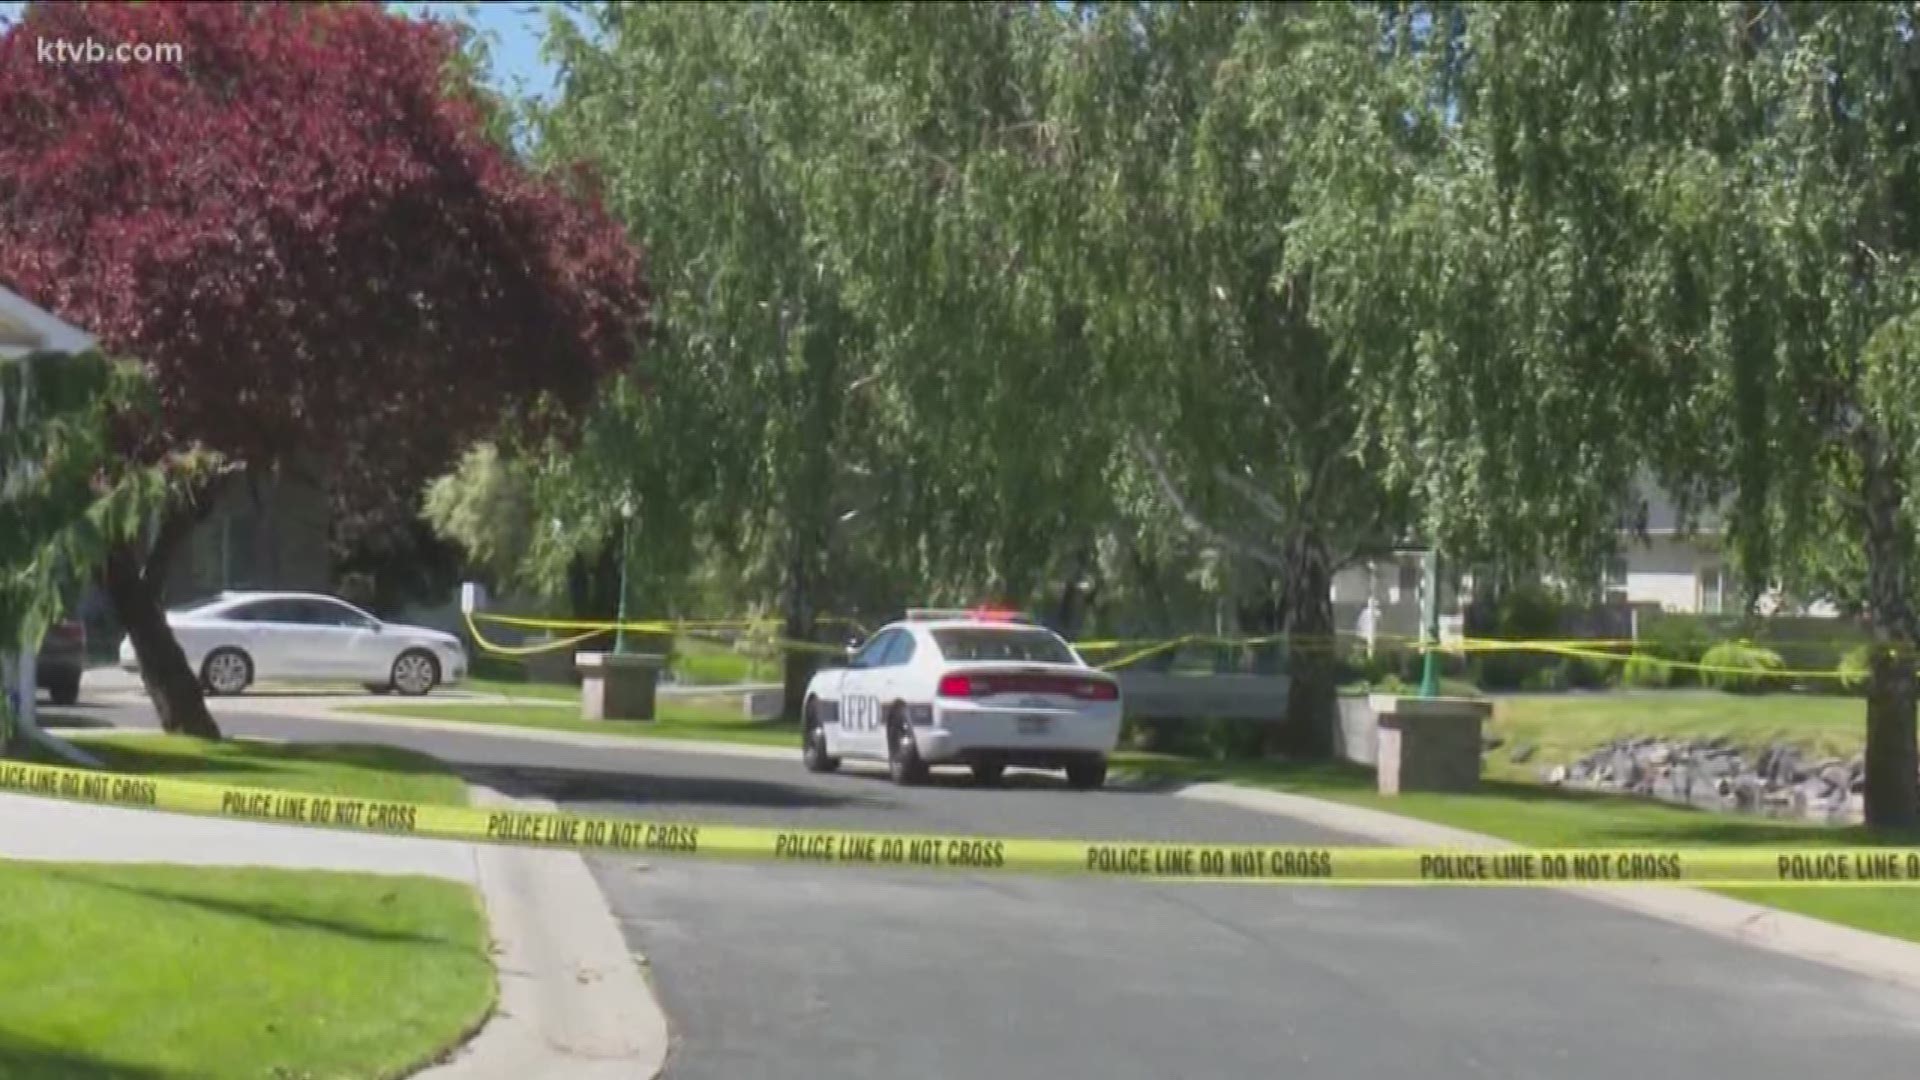 The body of an Idaho Falls woman was found buried in her backyard. Her boyfriend has been charged with killing her.